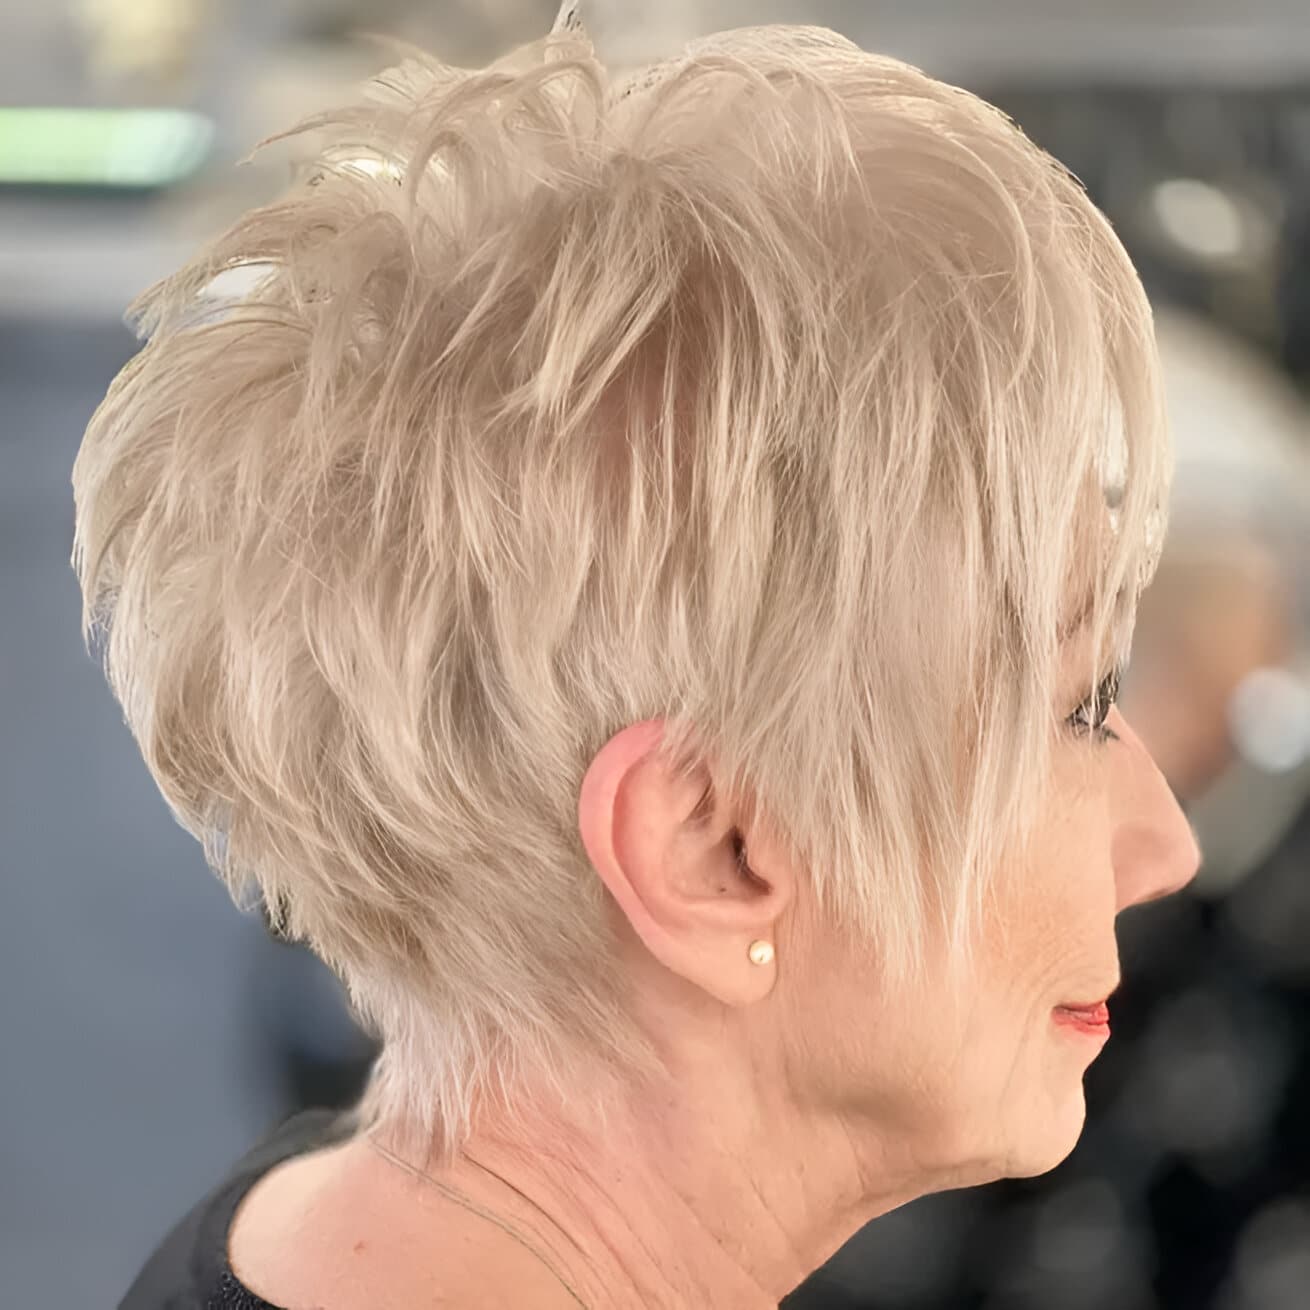 Light Blonde Pixie With Piece-y Face Framing